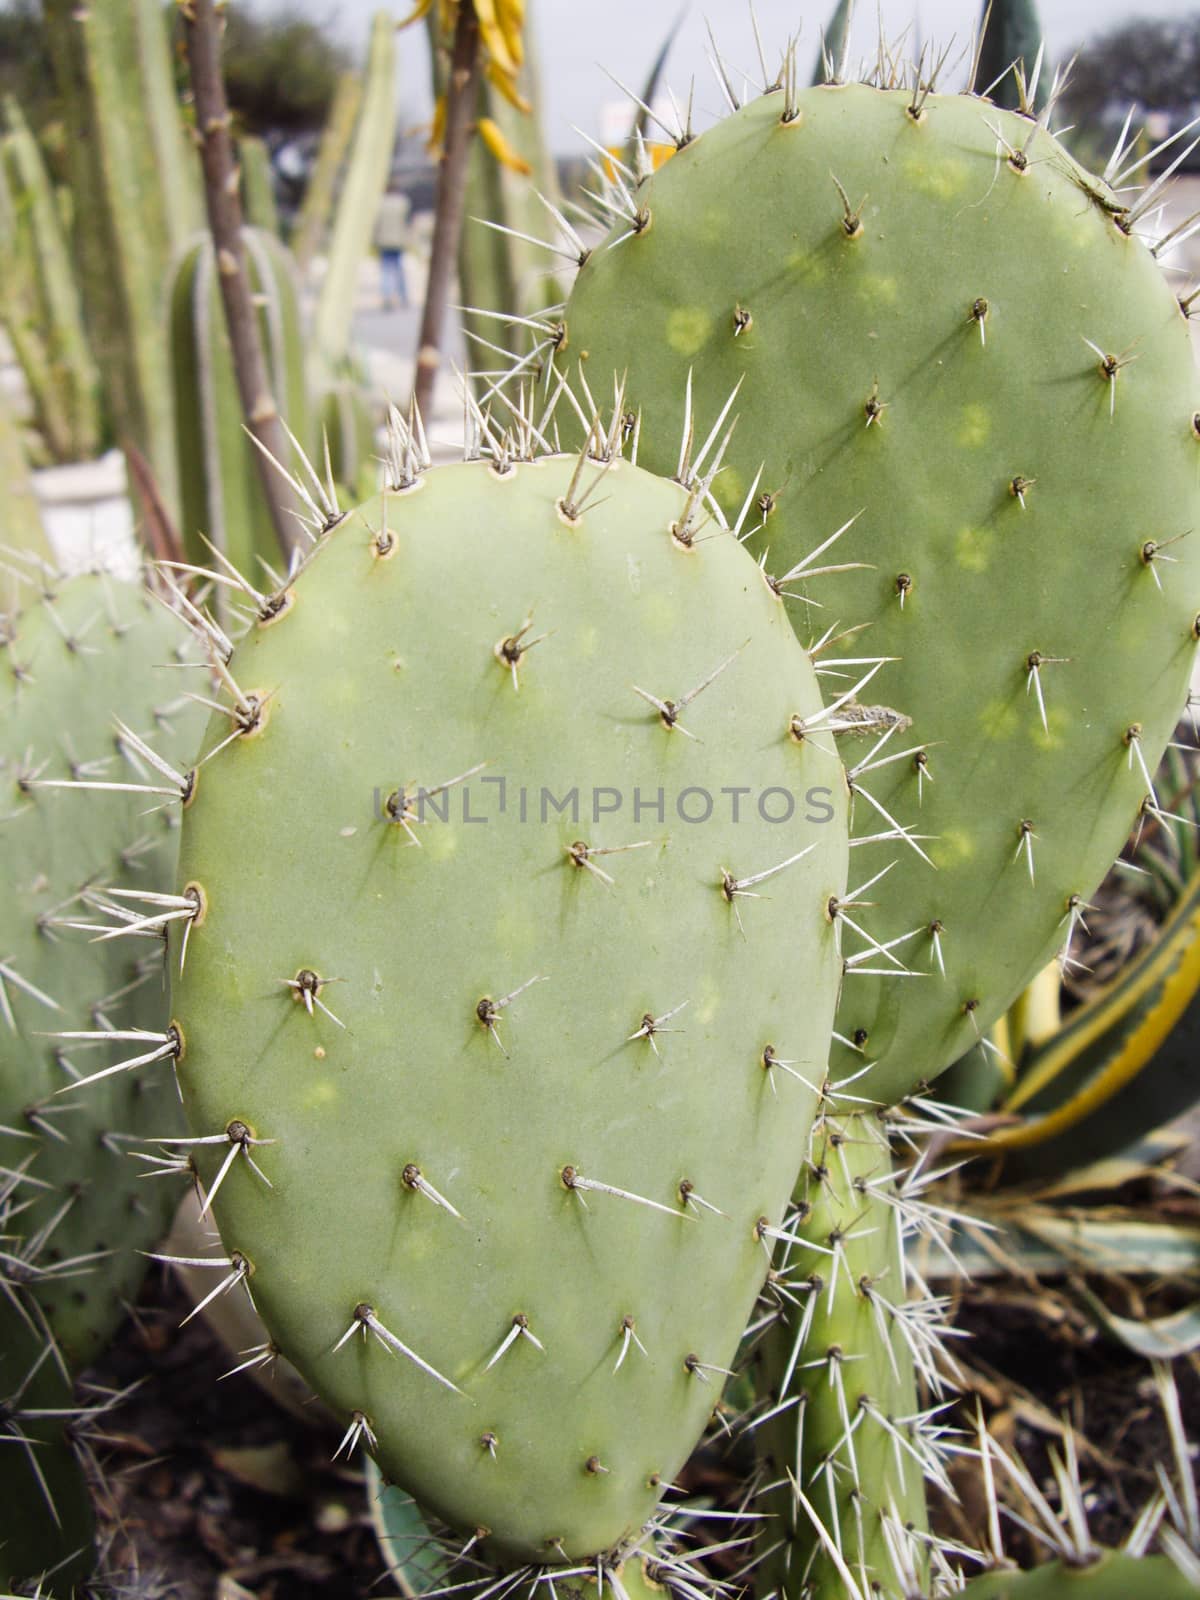 Spines on Cactus by emattil